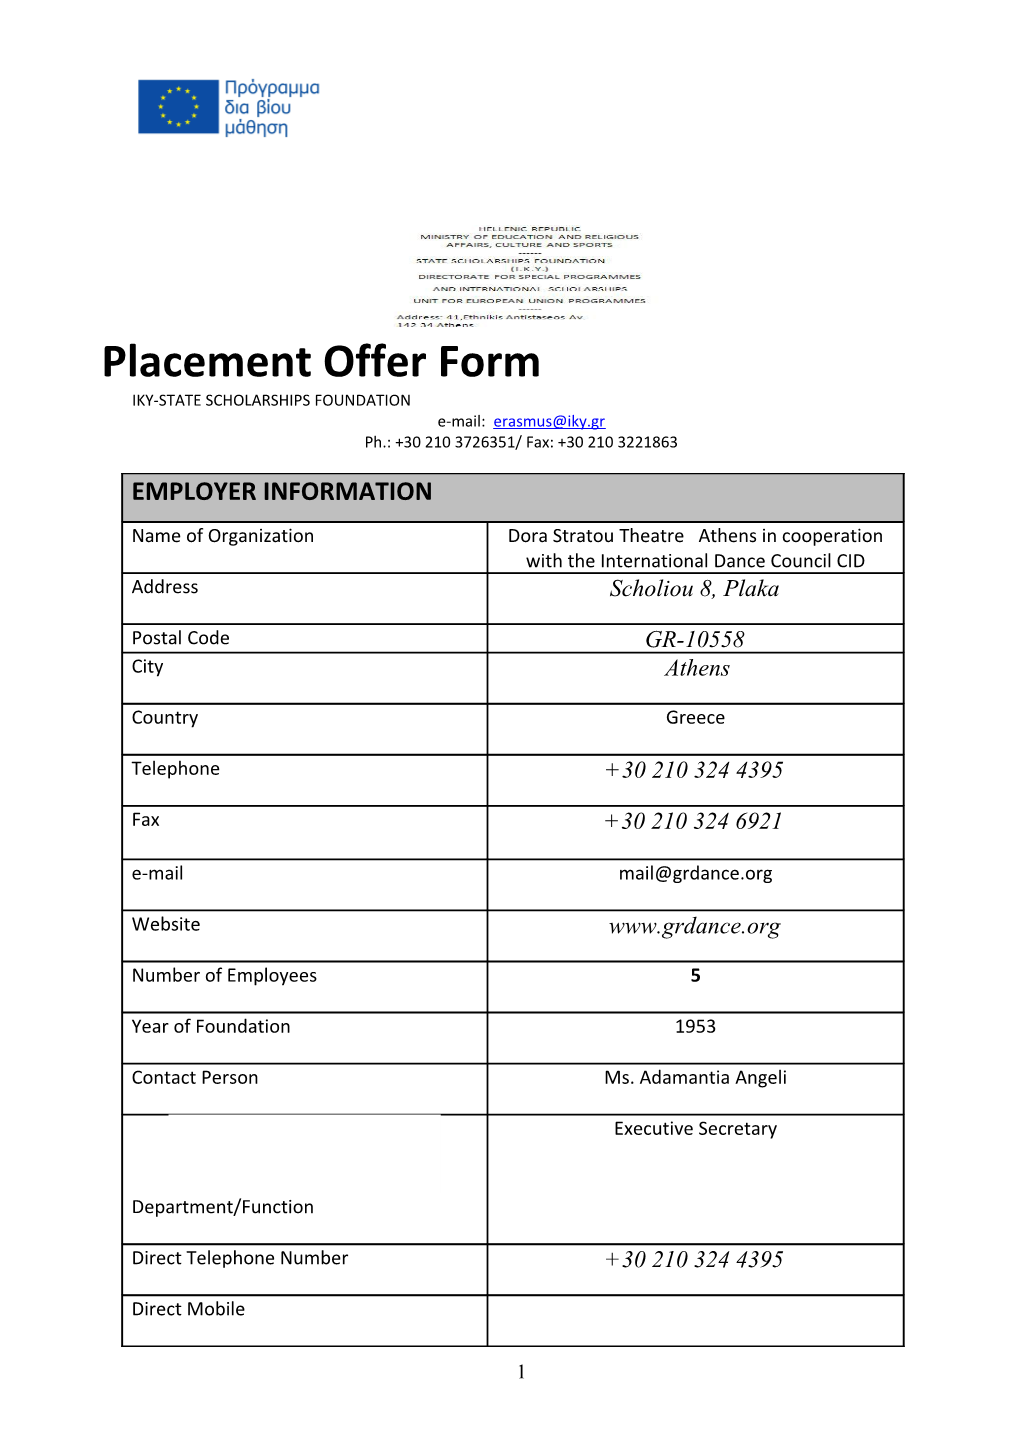 Placement Offer Form s2